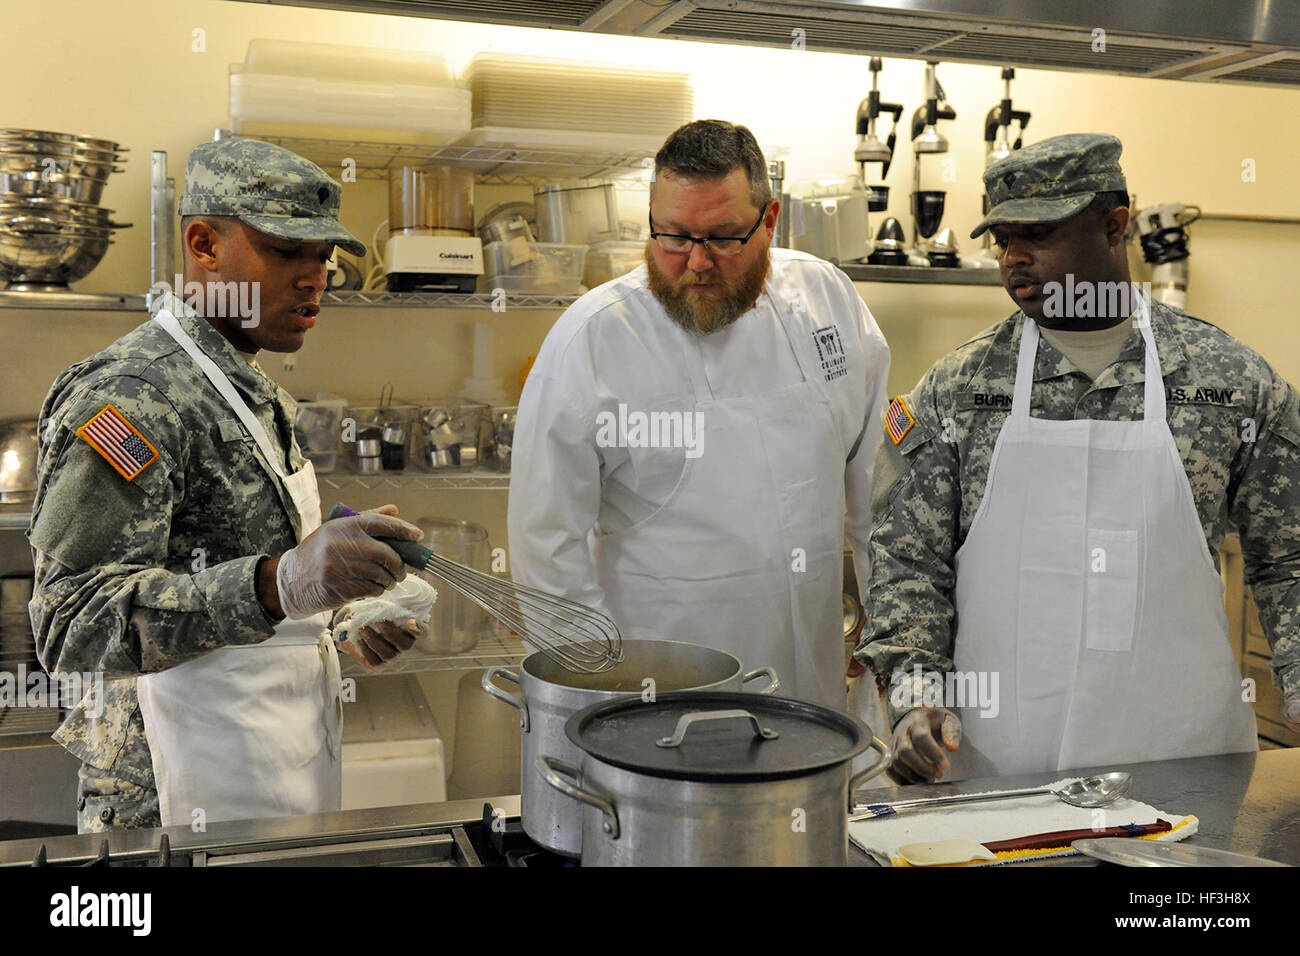 Spc. Kevius Willis, of Edwards, Miss., assigned to Headquarters Company, 106th Support Battalion, 155th Armored Brigade Combat Team, Chef Chris Ellis, and Spc. Jermaine Burns, of Indianola, Miss., assigned to the 1387th Quartermaster Company, Mississippi Army National Guard (MSARNG) discuss spicy brown rice pilaf during a food service workshop conducted by the Culinary Arts Institute at the Mississippi University for Women on July 23, 2015.  The eighth-annual workshop provided MSARNG food service specialists with lecture and hands-on skill development designed not only to focus on the basics,  Stock Photo